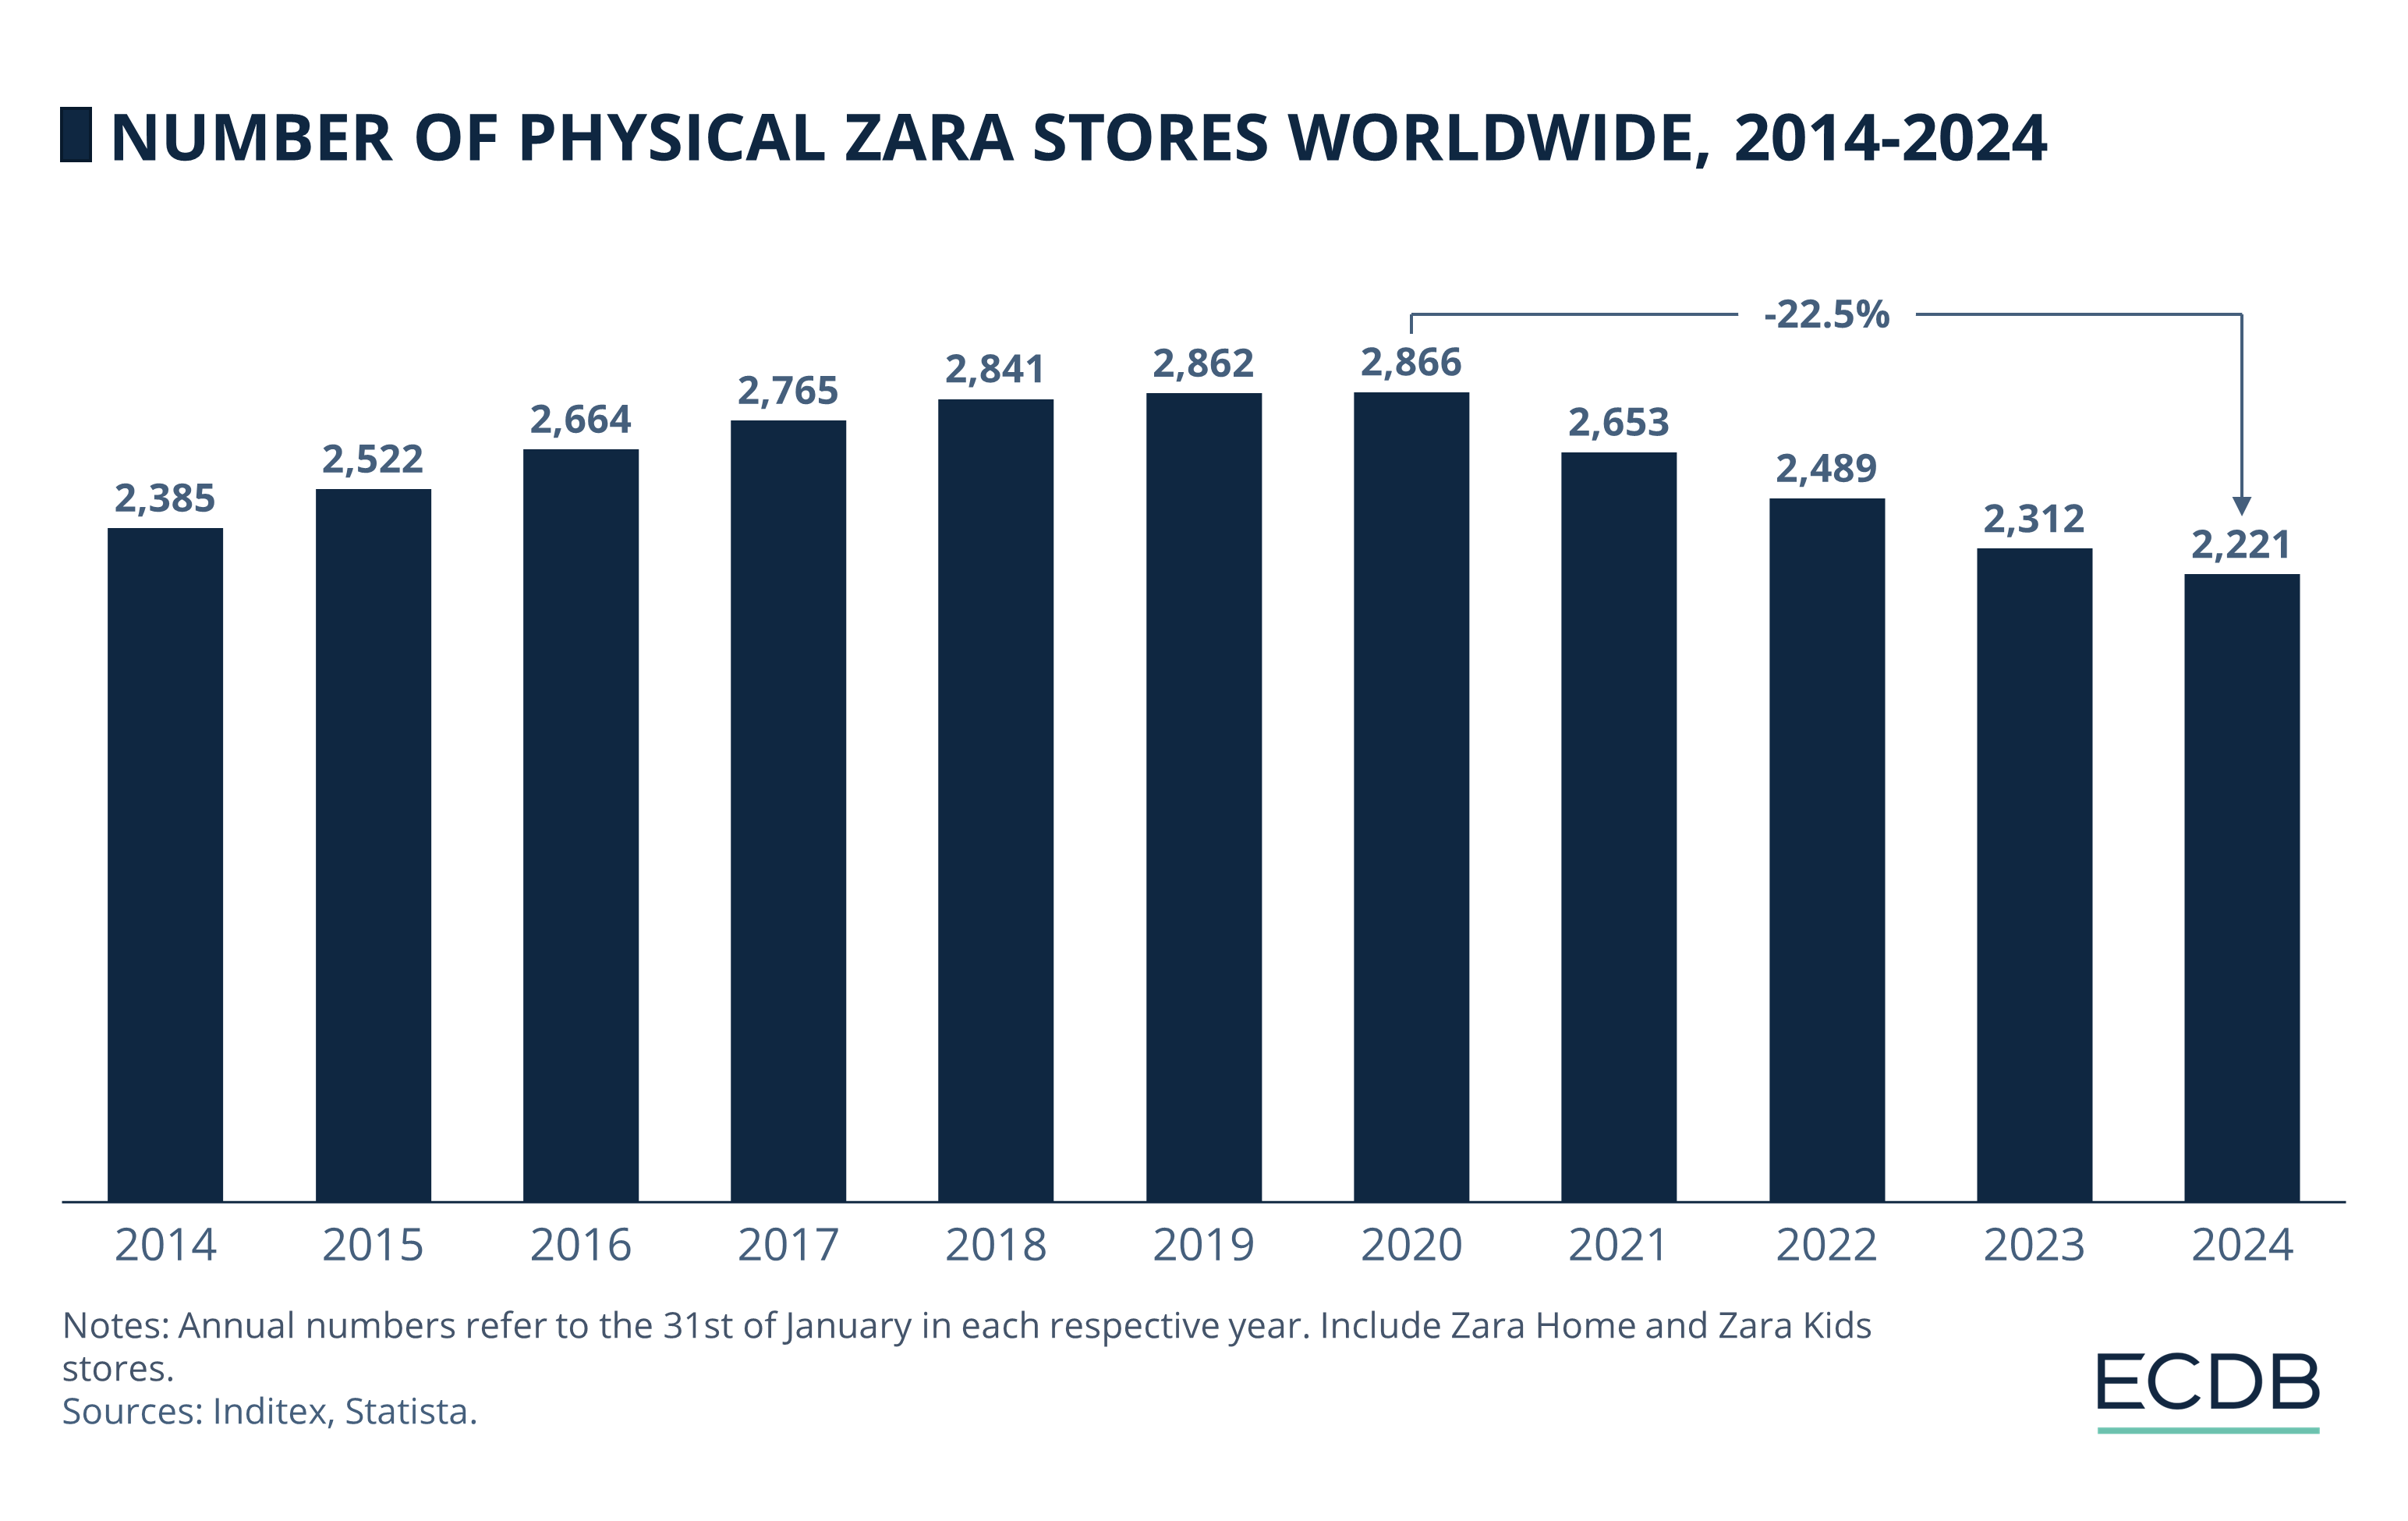 Number of Physical Zara Stores Worldwide, 2014-2024